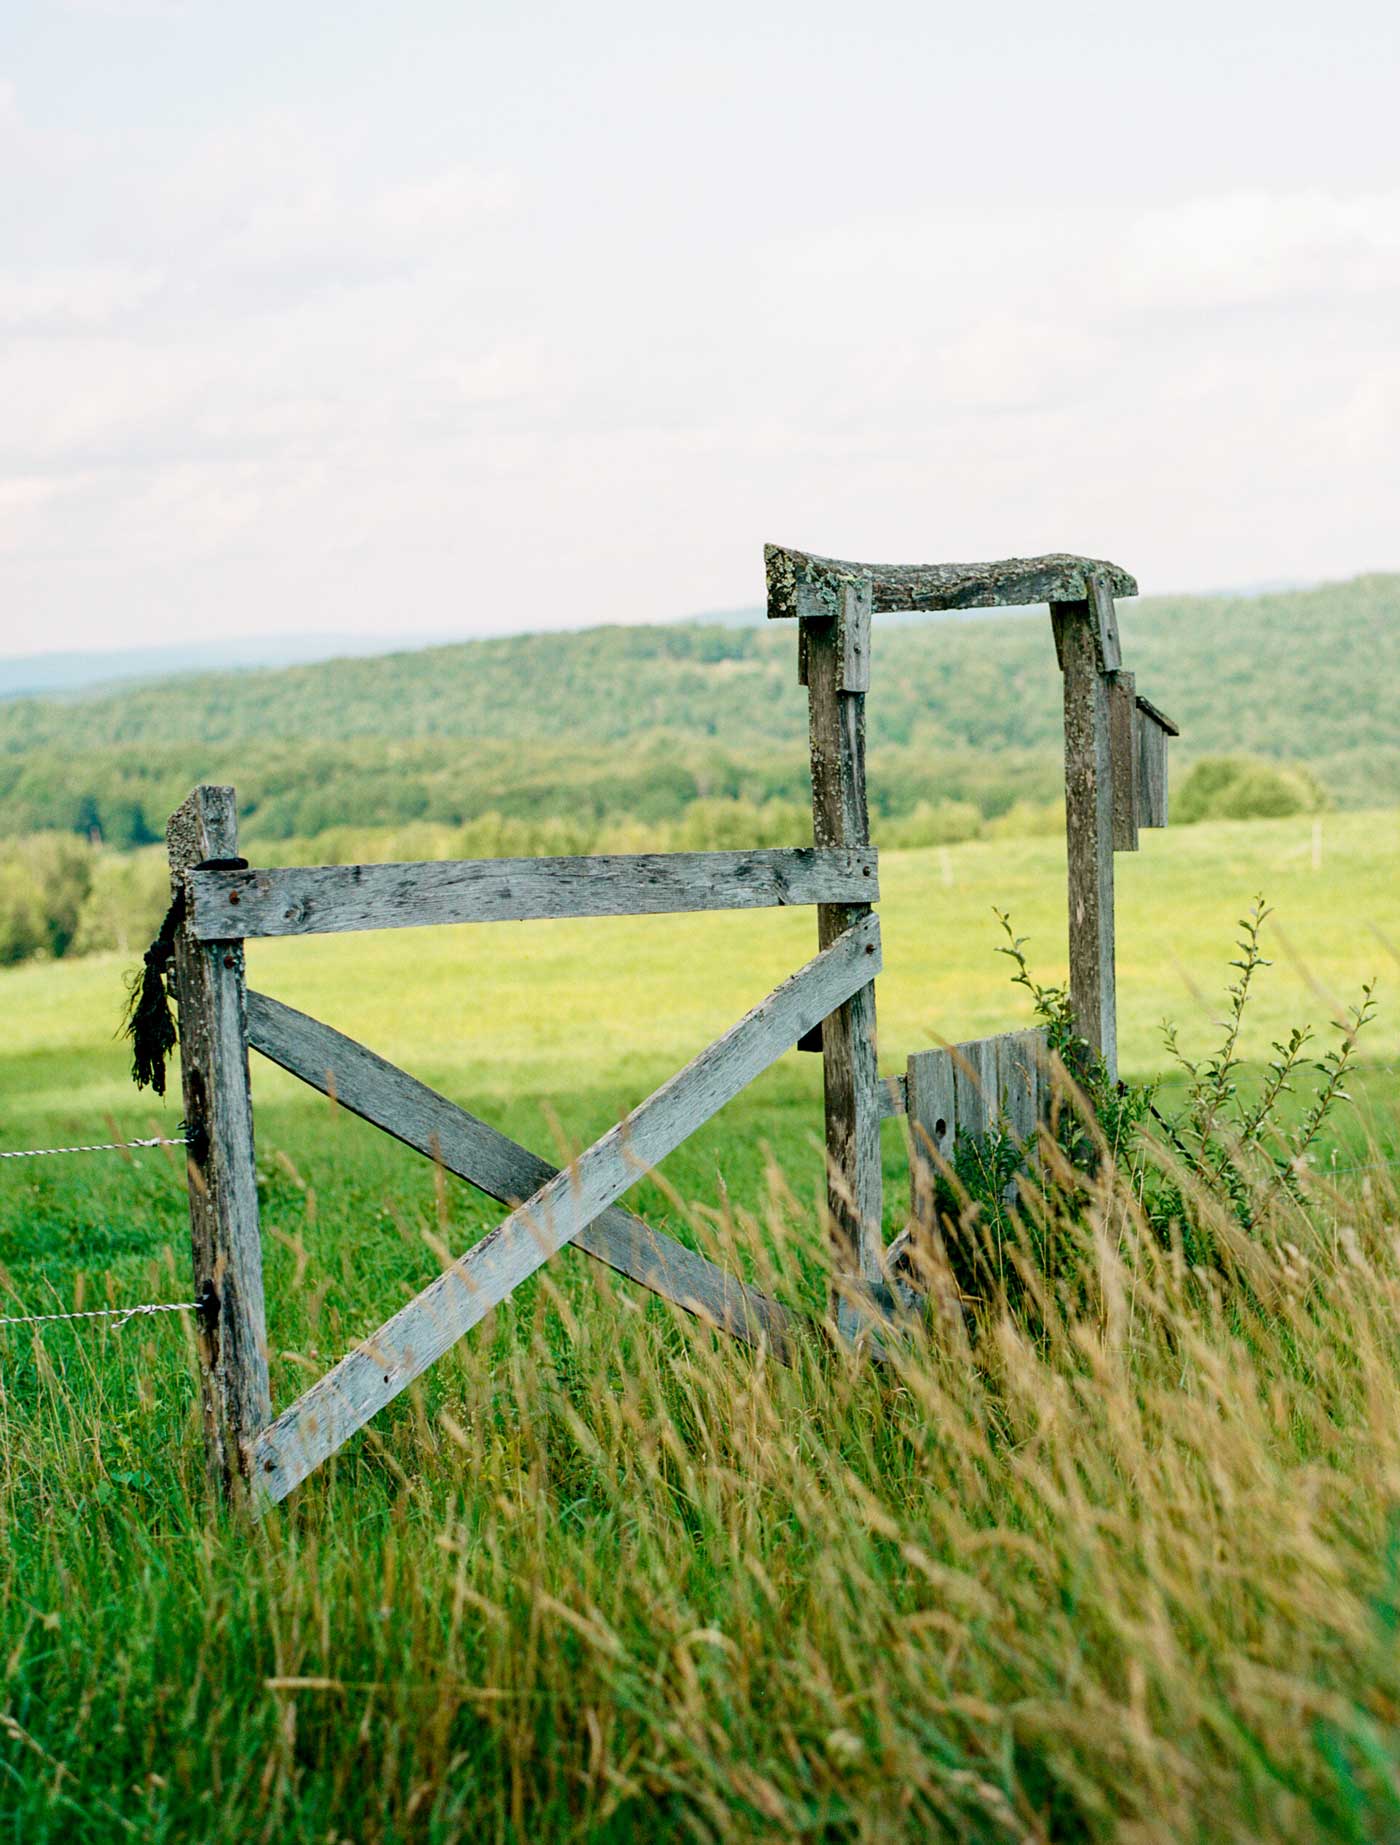 An aged wooden gate in a field.